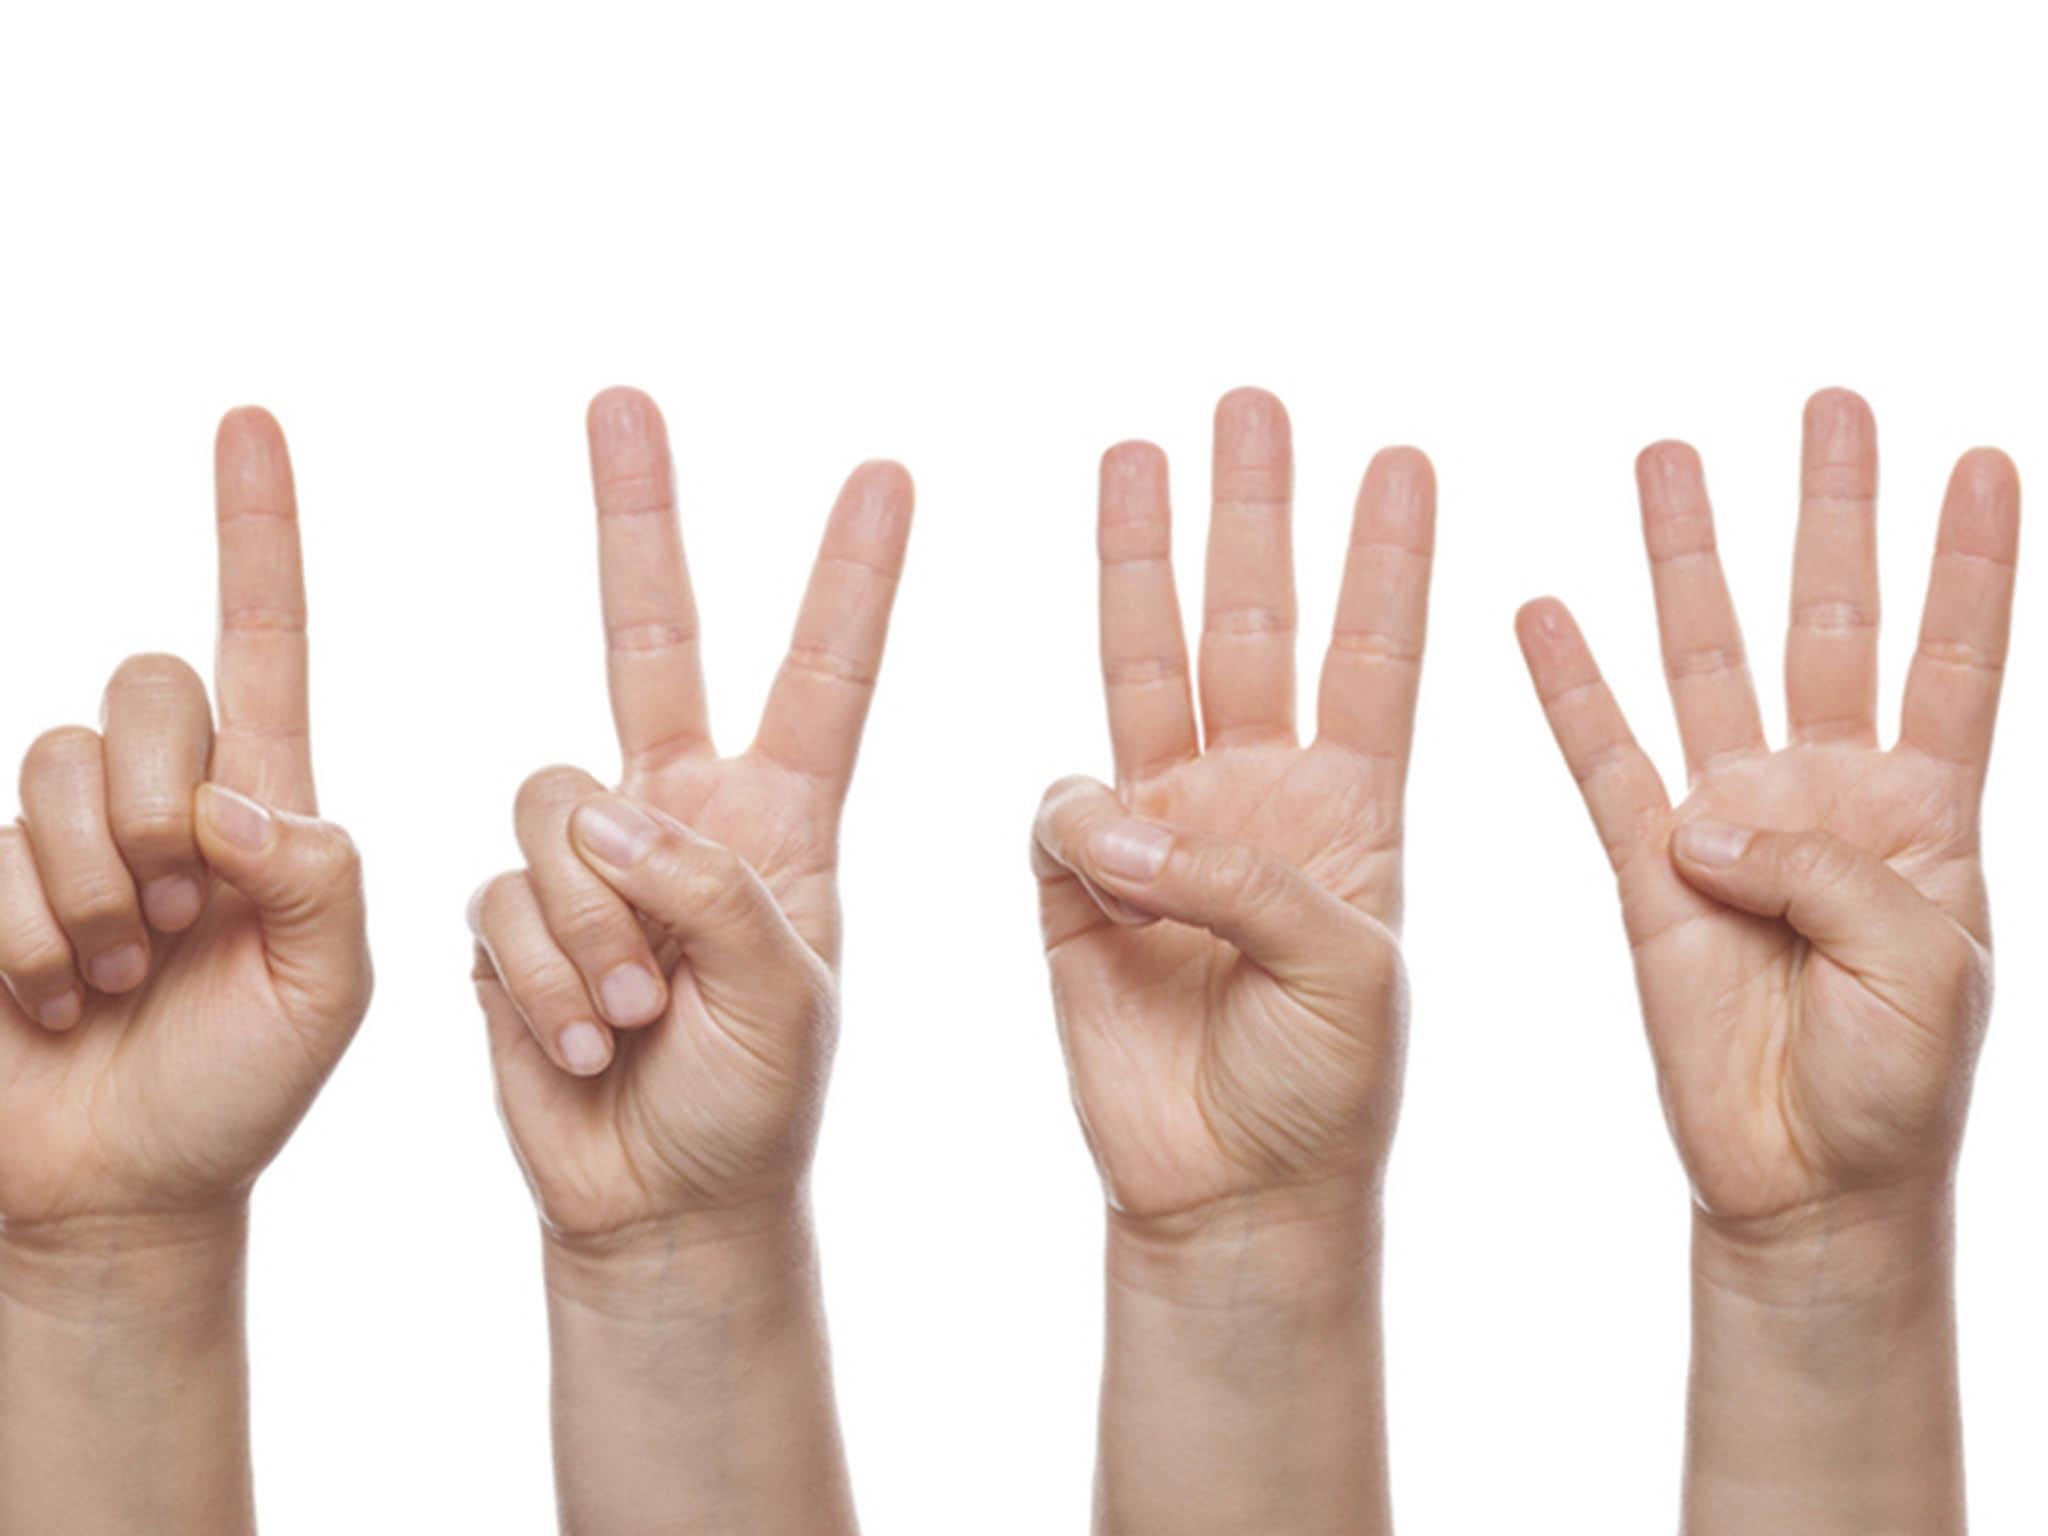 It's not a sign of mental deficiency, counting with your hands is actually a sign of cognitive ability